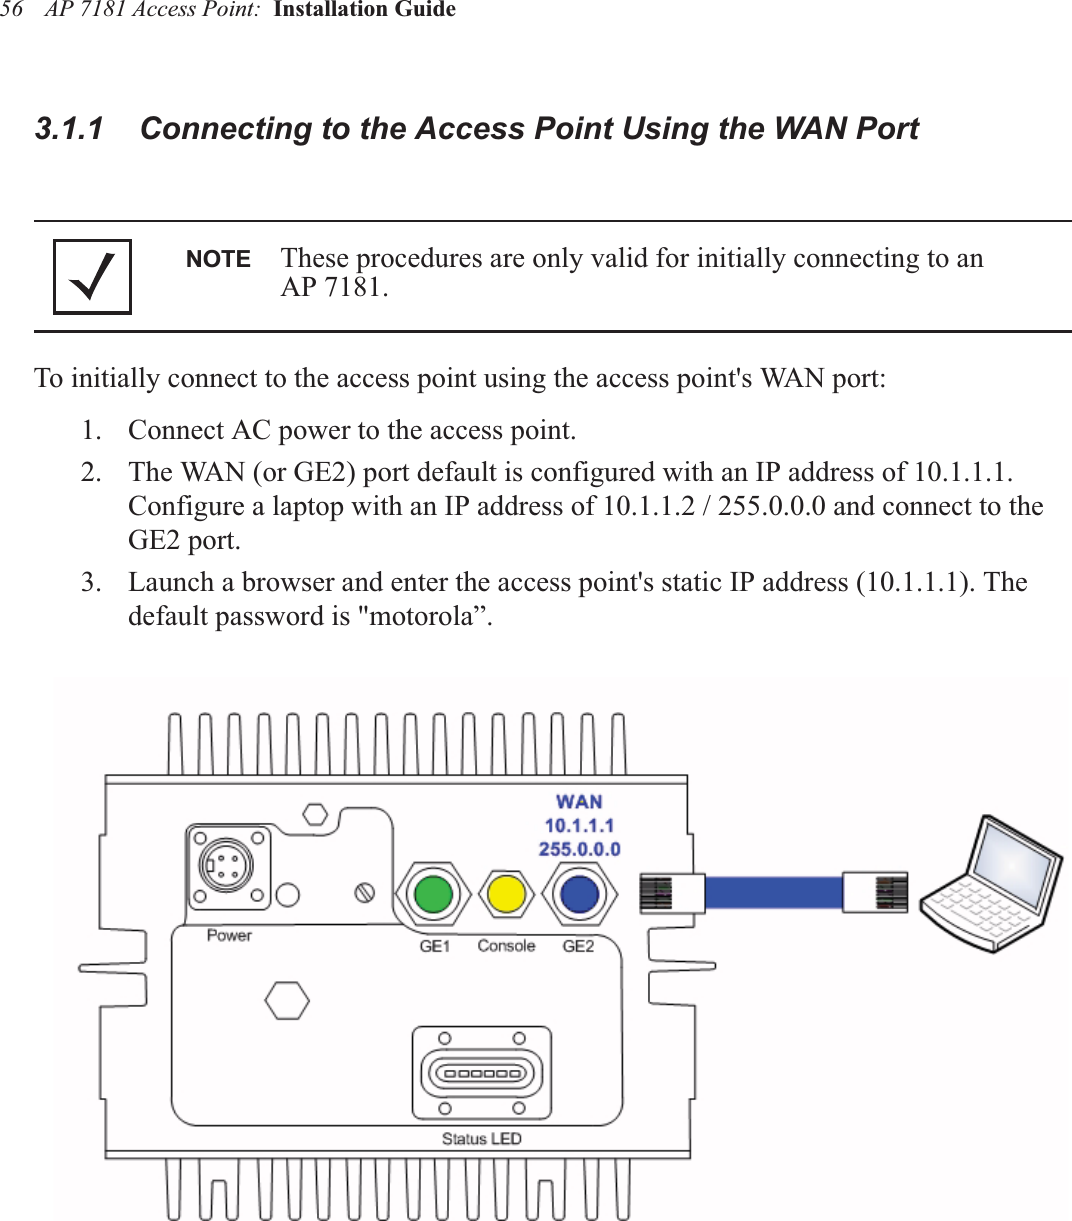 AP 7181 Access Point:  Installation Guide 563.1.1    Connecting to the Access Point Using the WAN PortTo initially connect to the access point using the access point&apos;s WAN port:1. Connect AC power to the access point.2. The WAN (or GE2) port default is configured with an IP address of 10.1.1.1.  Configure a laptop with an IP address of 10.1.1.2 / 255.0.0.0 and connect to the GE2 port.3. Launch a browser and enter the access point&apos;s static IP address (10.1.1.1). The default password is &quot;motorola”.NOTE These procedures are only valid for initially connecting to an     AP 7181.